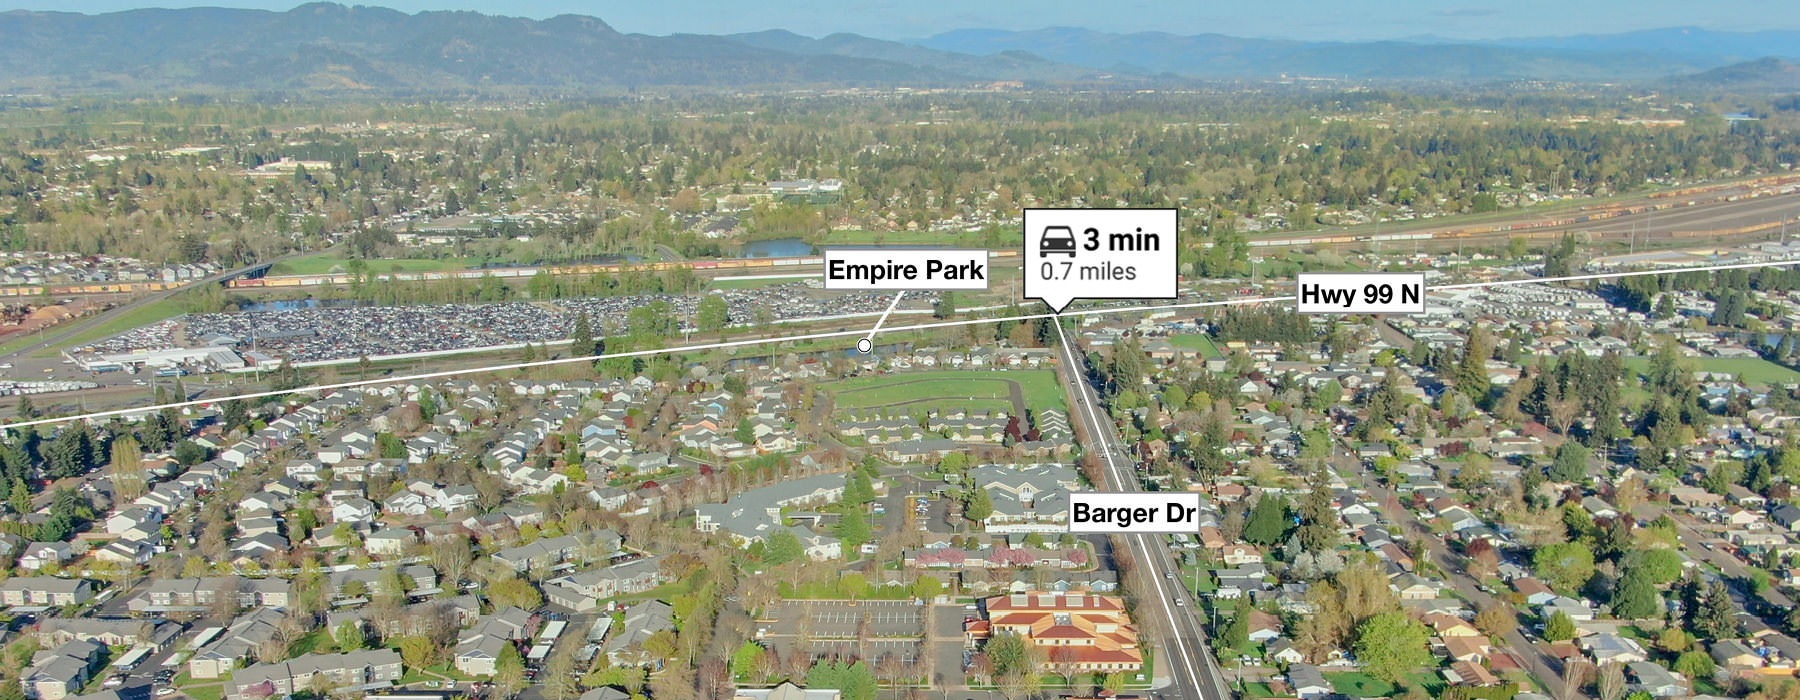 view of Stone Ridge Apartment community and surrounding neighborhood with nearby points of interest